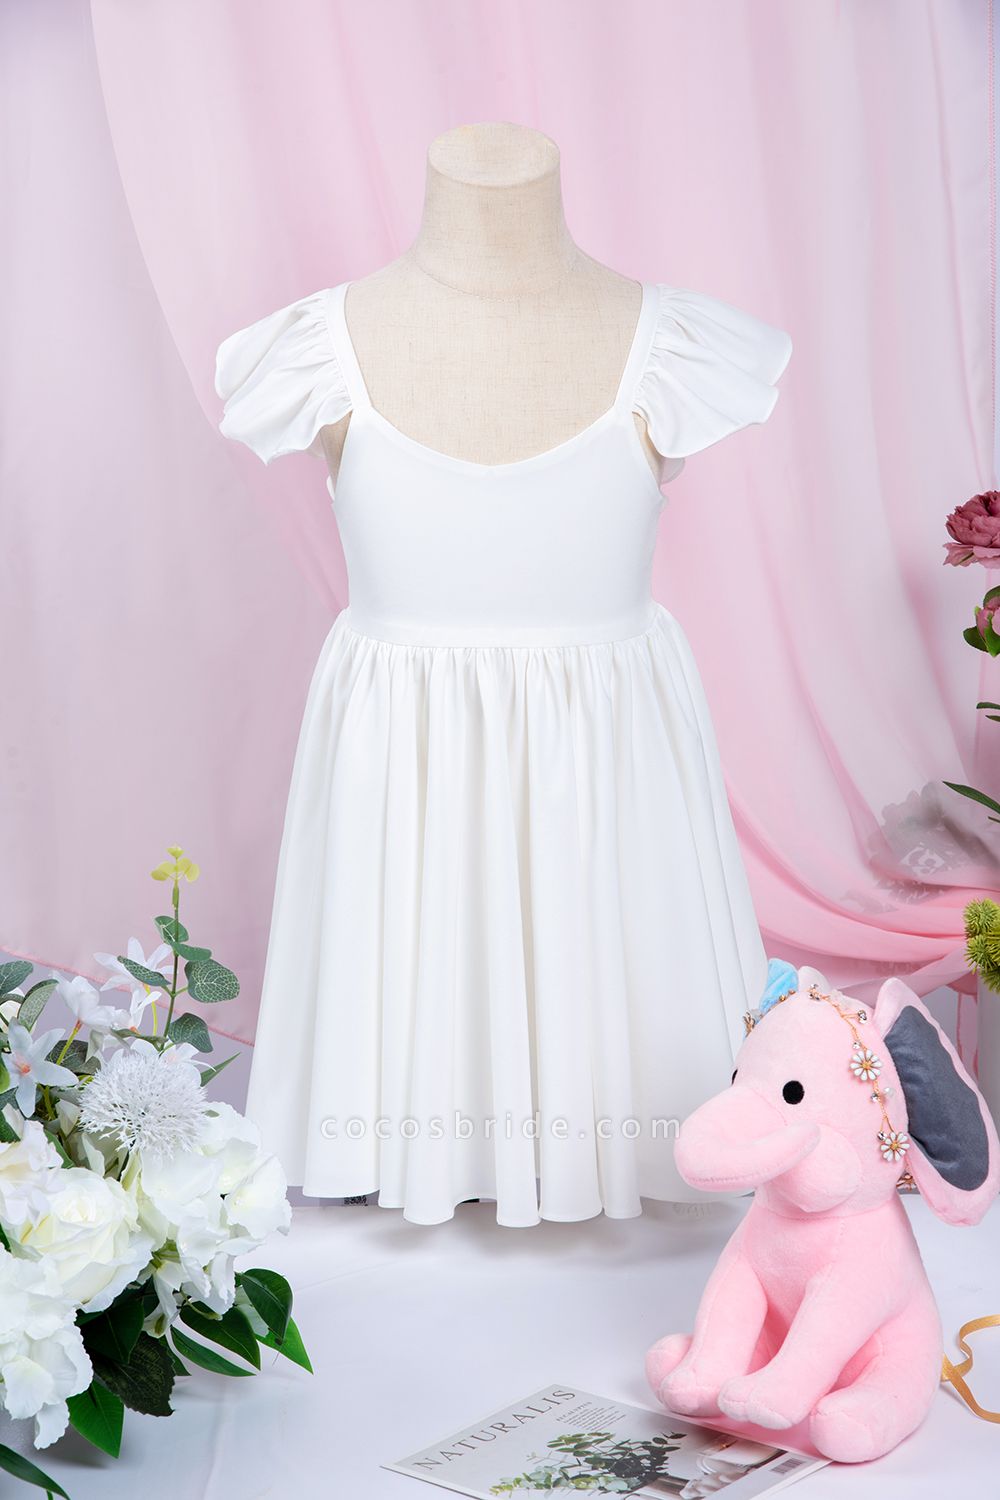 Cute A-line White Pleated Flower Girl Dress with Ruffle Sleeves